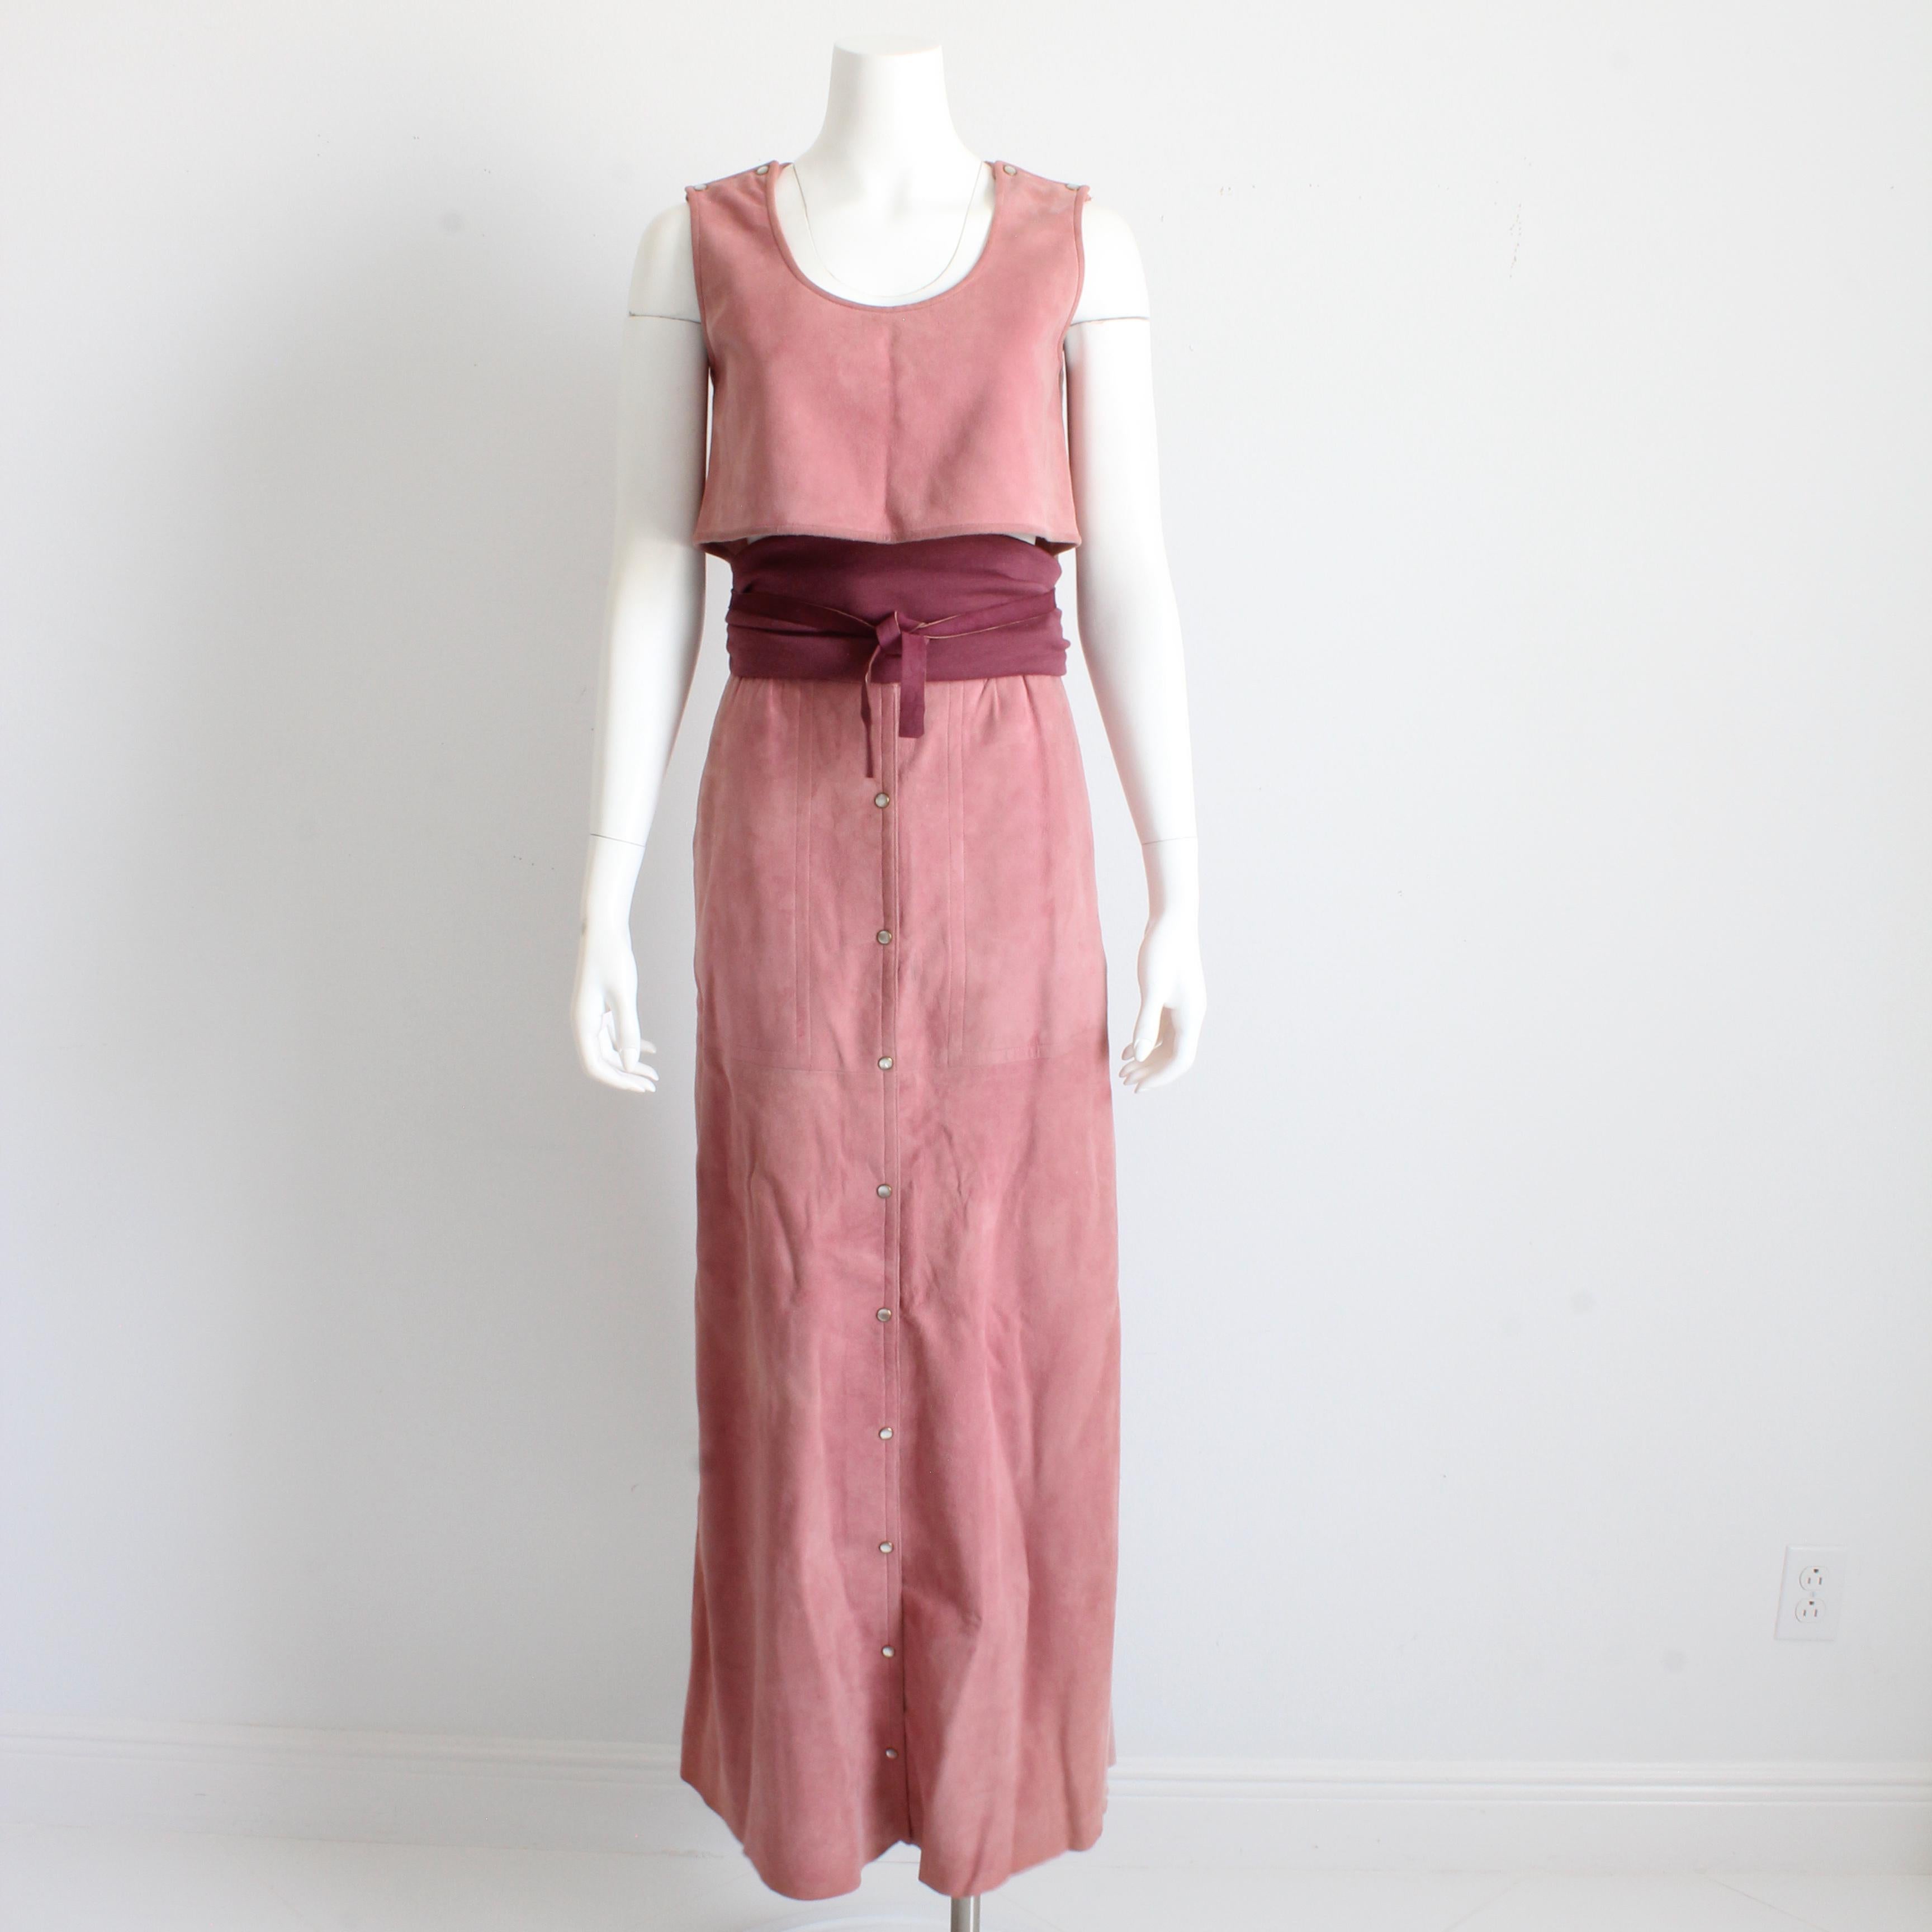 Bonnie Cashin for Sills Pale Pink Suede Skirt Set 3pc Top Skirt and Belt Rare S For Sale 5